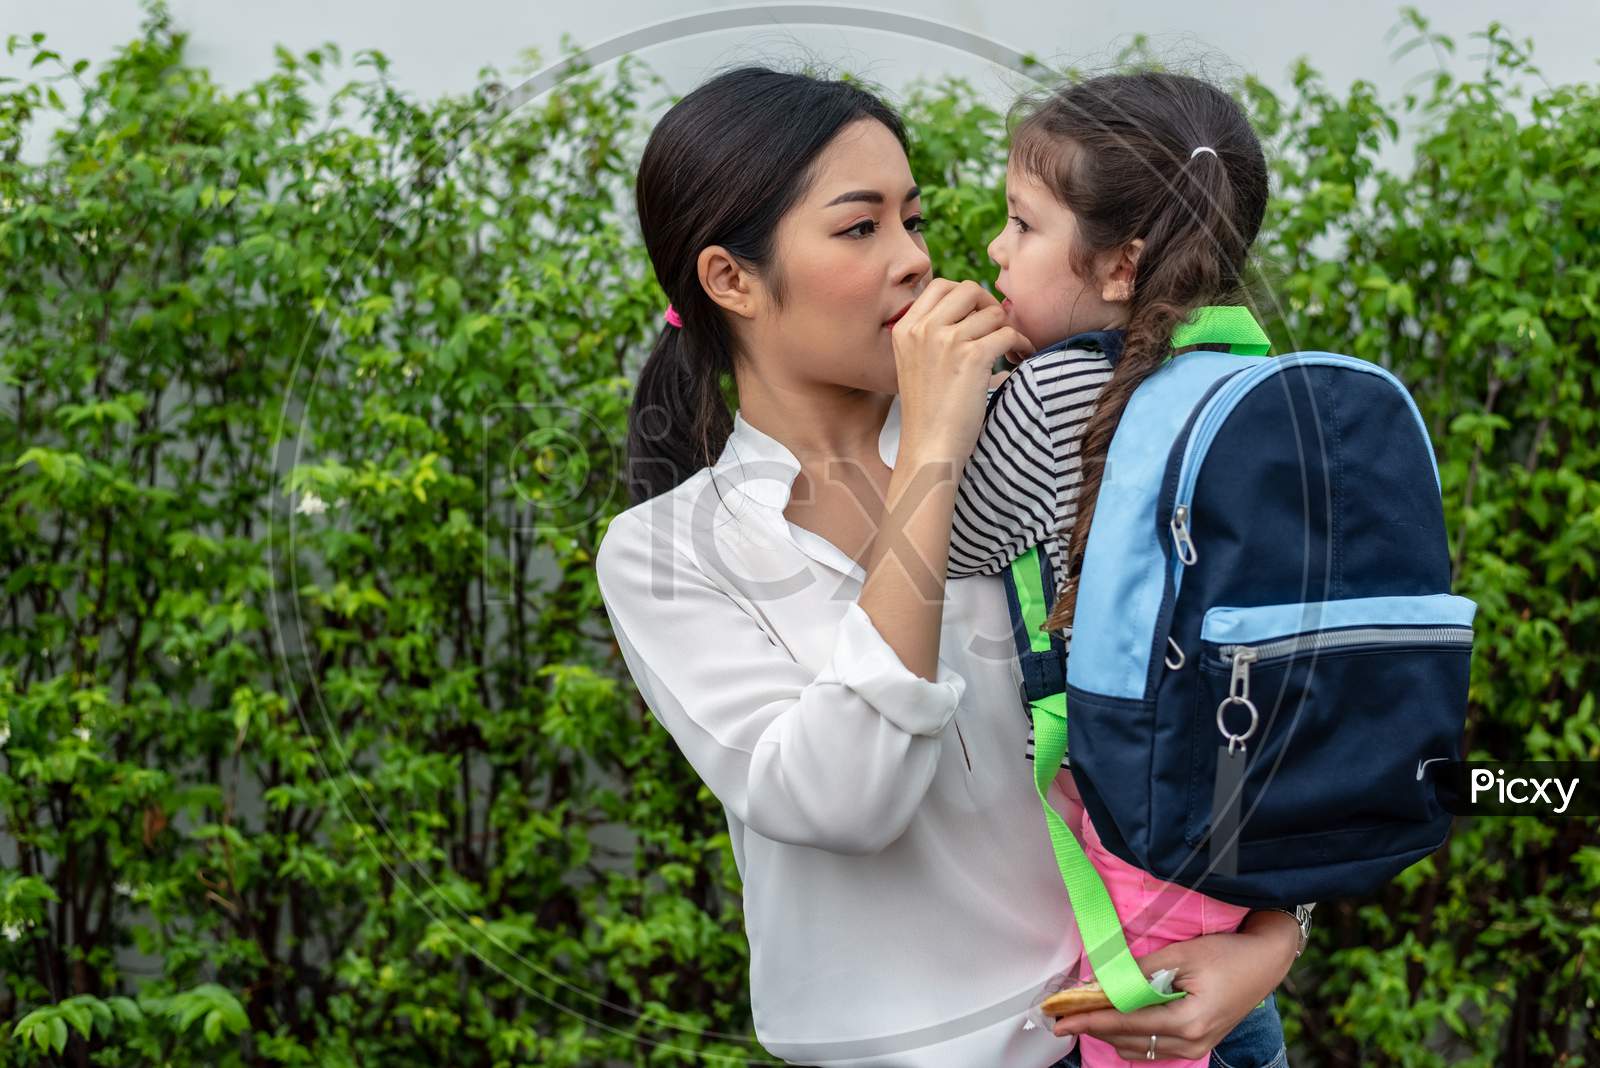 Mom Feeding Her Daughter With Snack Before Going To School. Back To School And Education Concept. Home Sweet Home And Happy Family Theme.